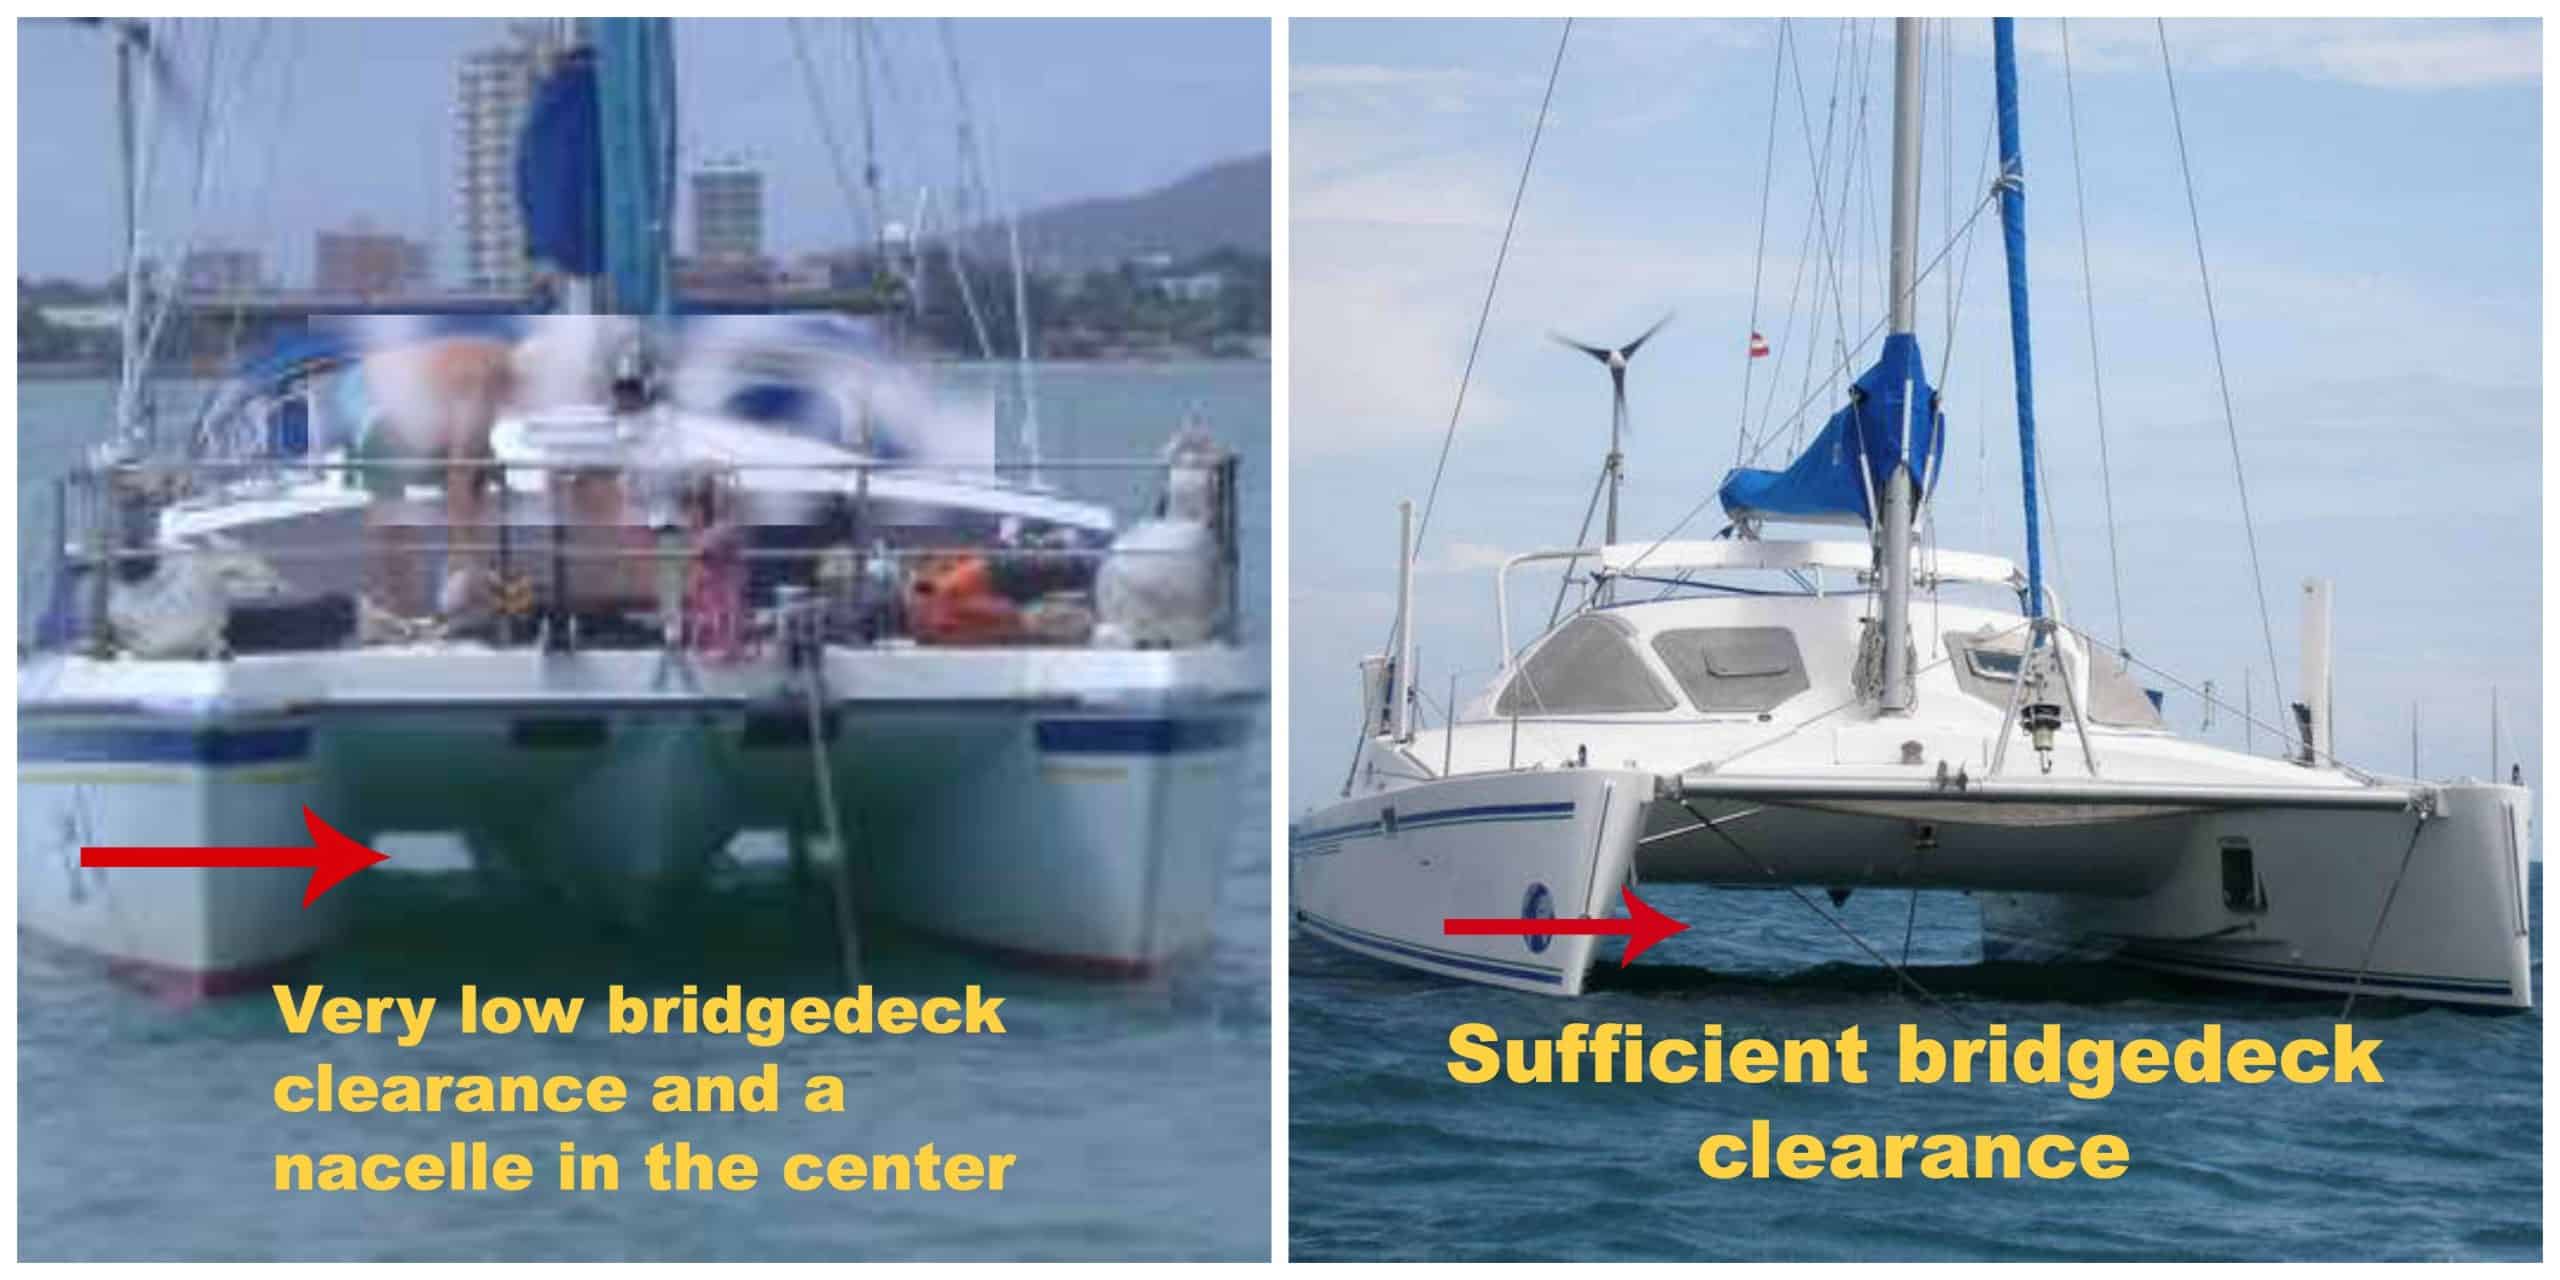 Catamaran Bridgedeck clearance comparisons of too low and well-proportioned catamarans